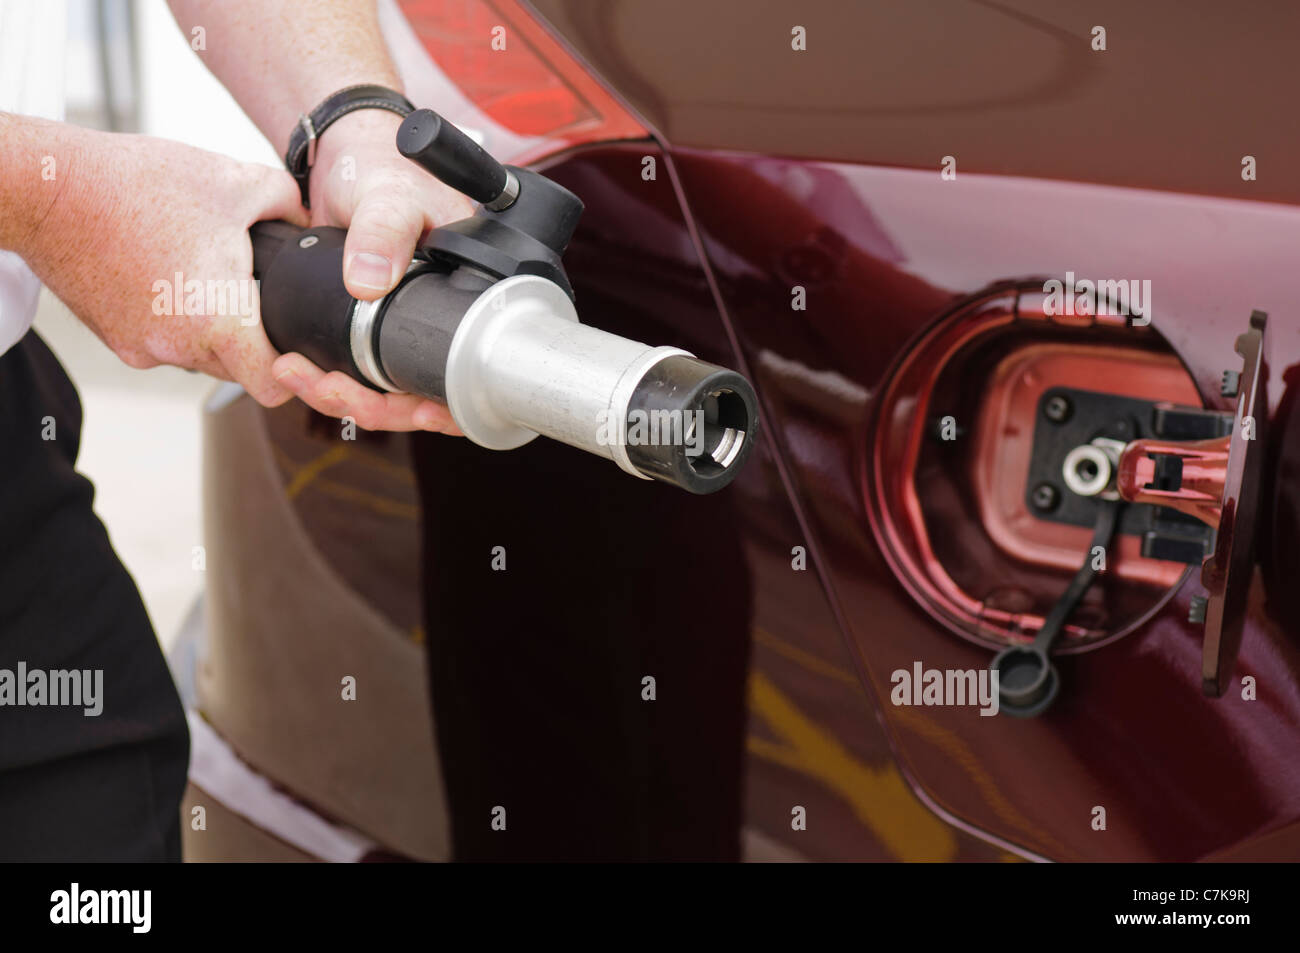 Using a hydrogen fuel pump with high pressure nozzle Stock Photo